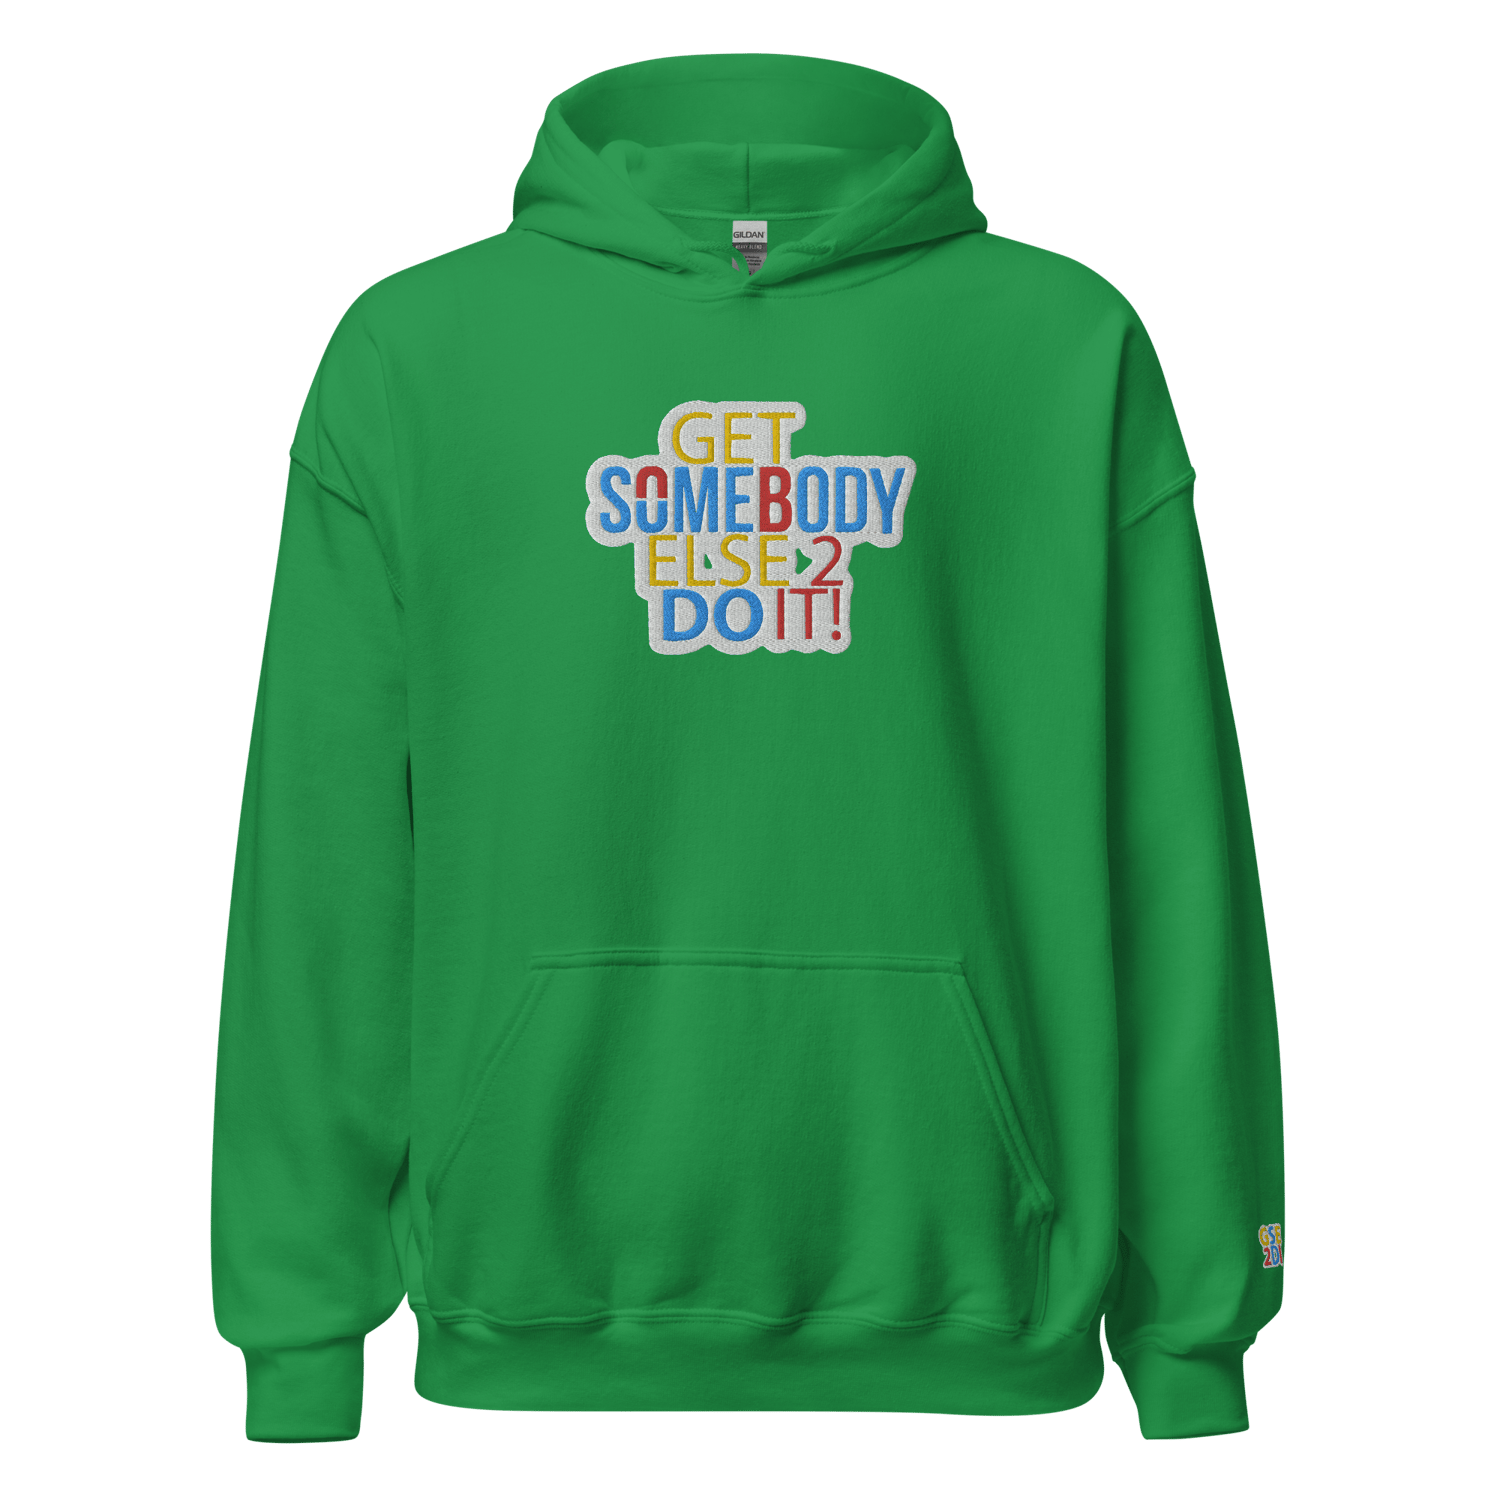 Image of GET SOMEBODY ELSE 2 DO IT Hoodie